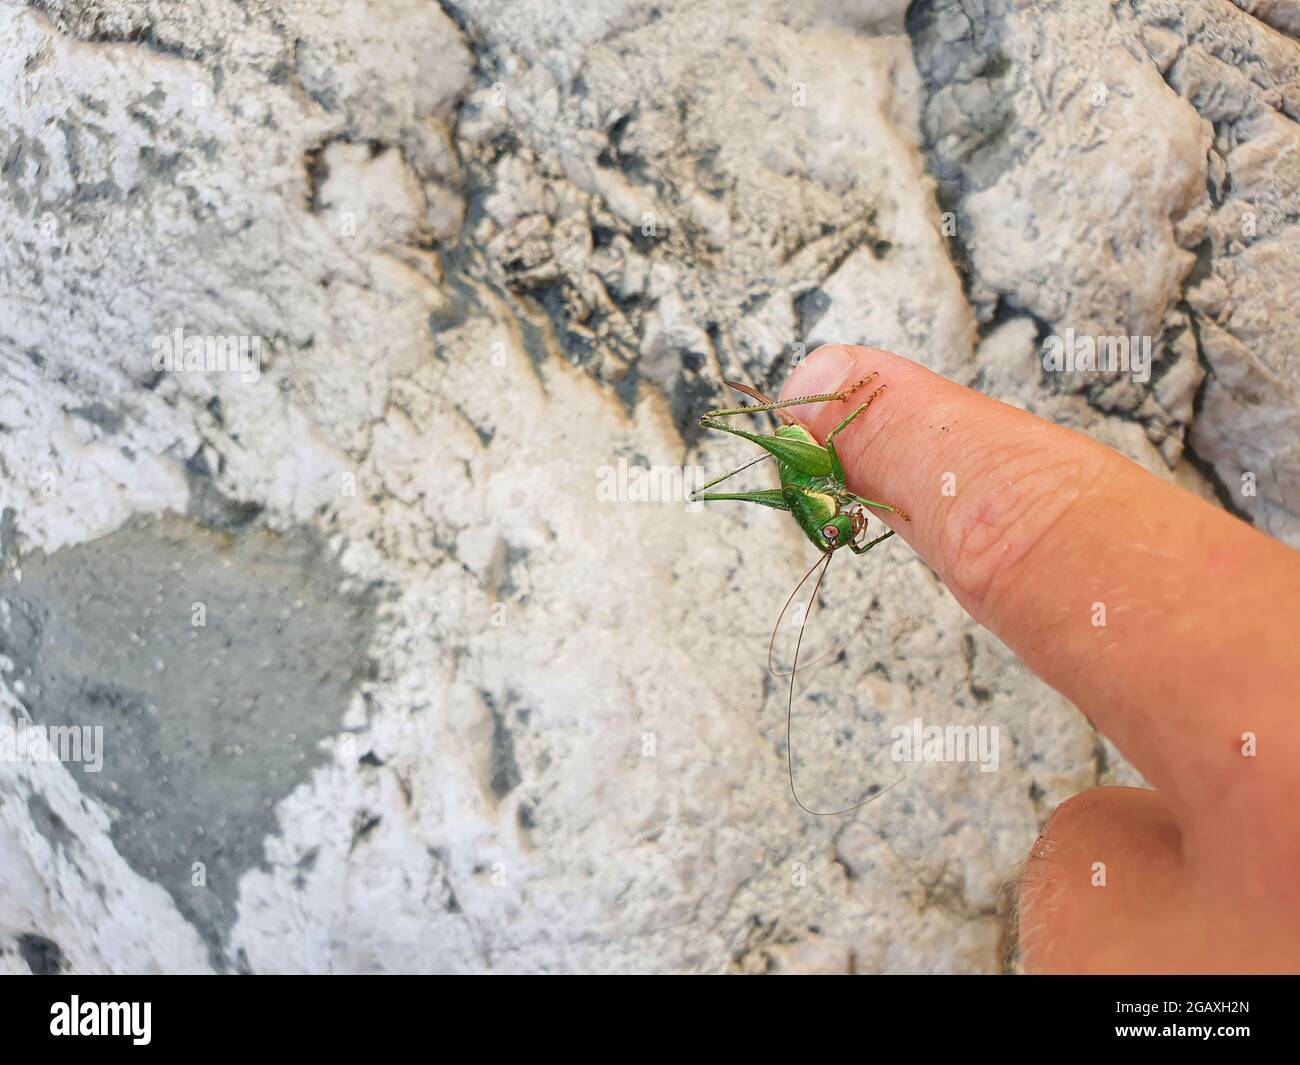 A green grasshopper sits on a human finger. The insect sits motionless and basks in the sun. Stock Photo